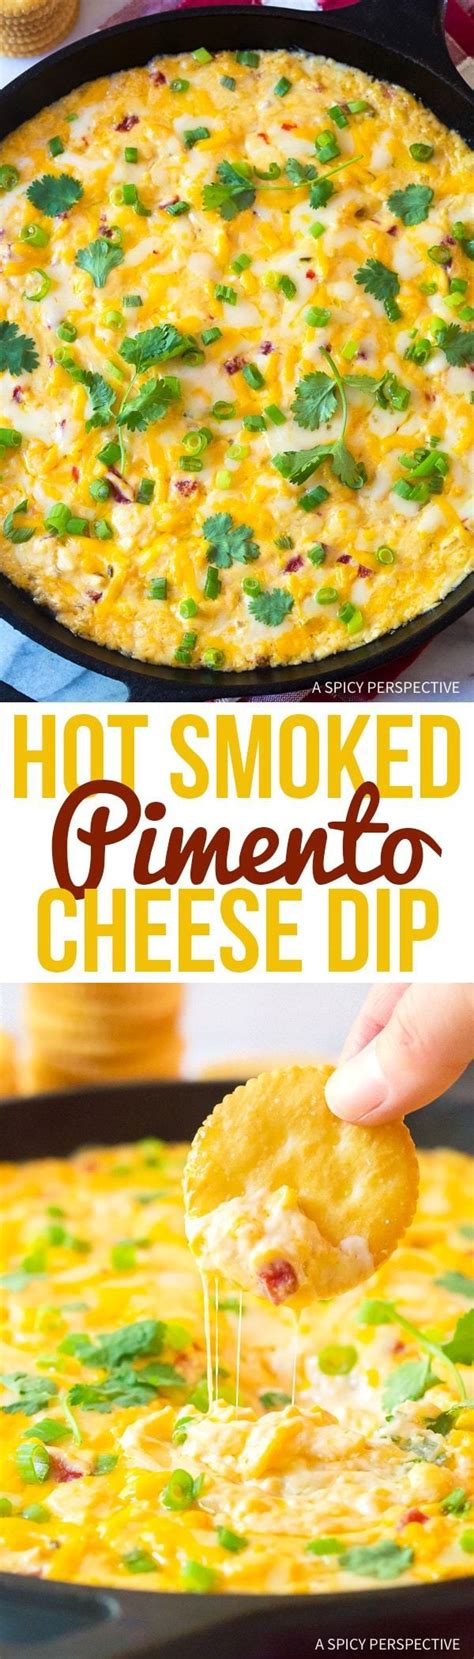 Hot Smoked Pimento Cheese Dip A Spicy Perspective Diy Easy Recipes Recipes Diy Food Recipes